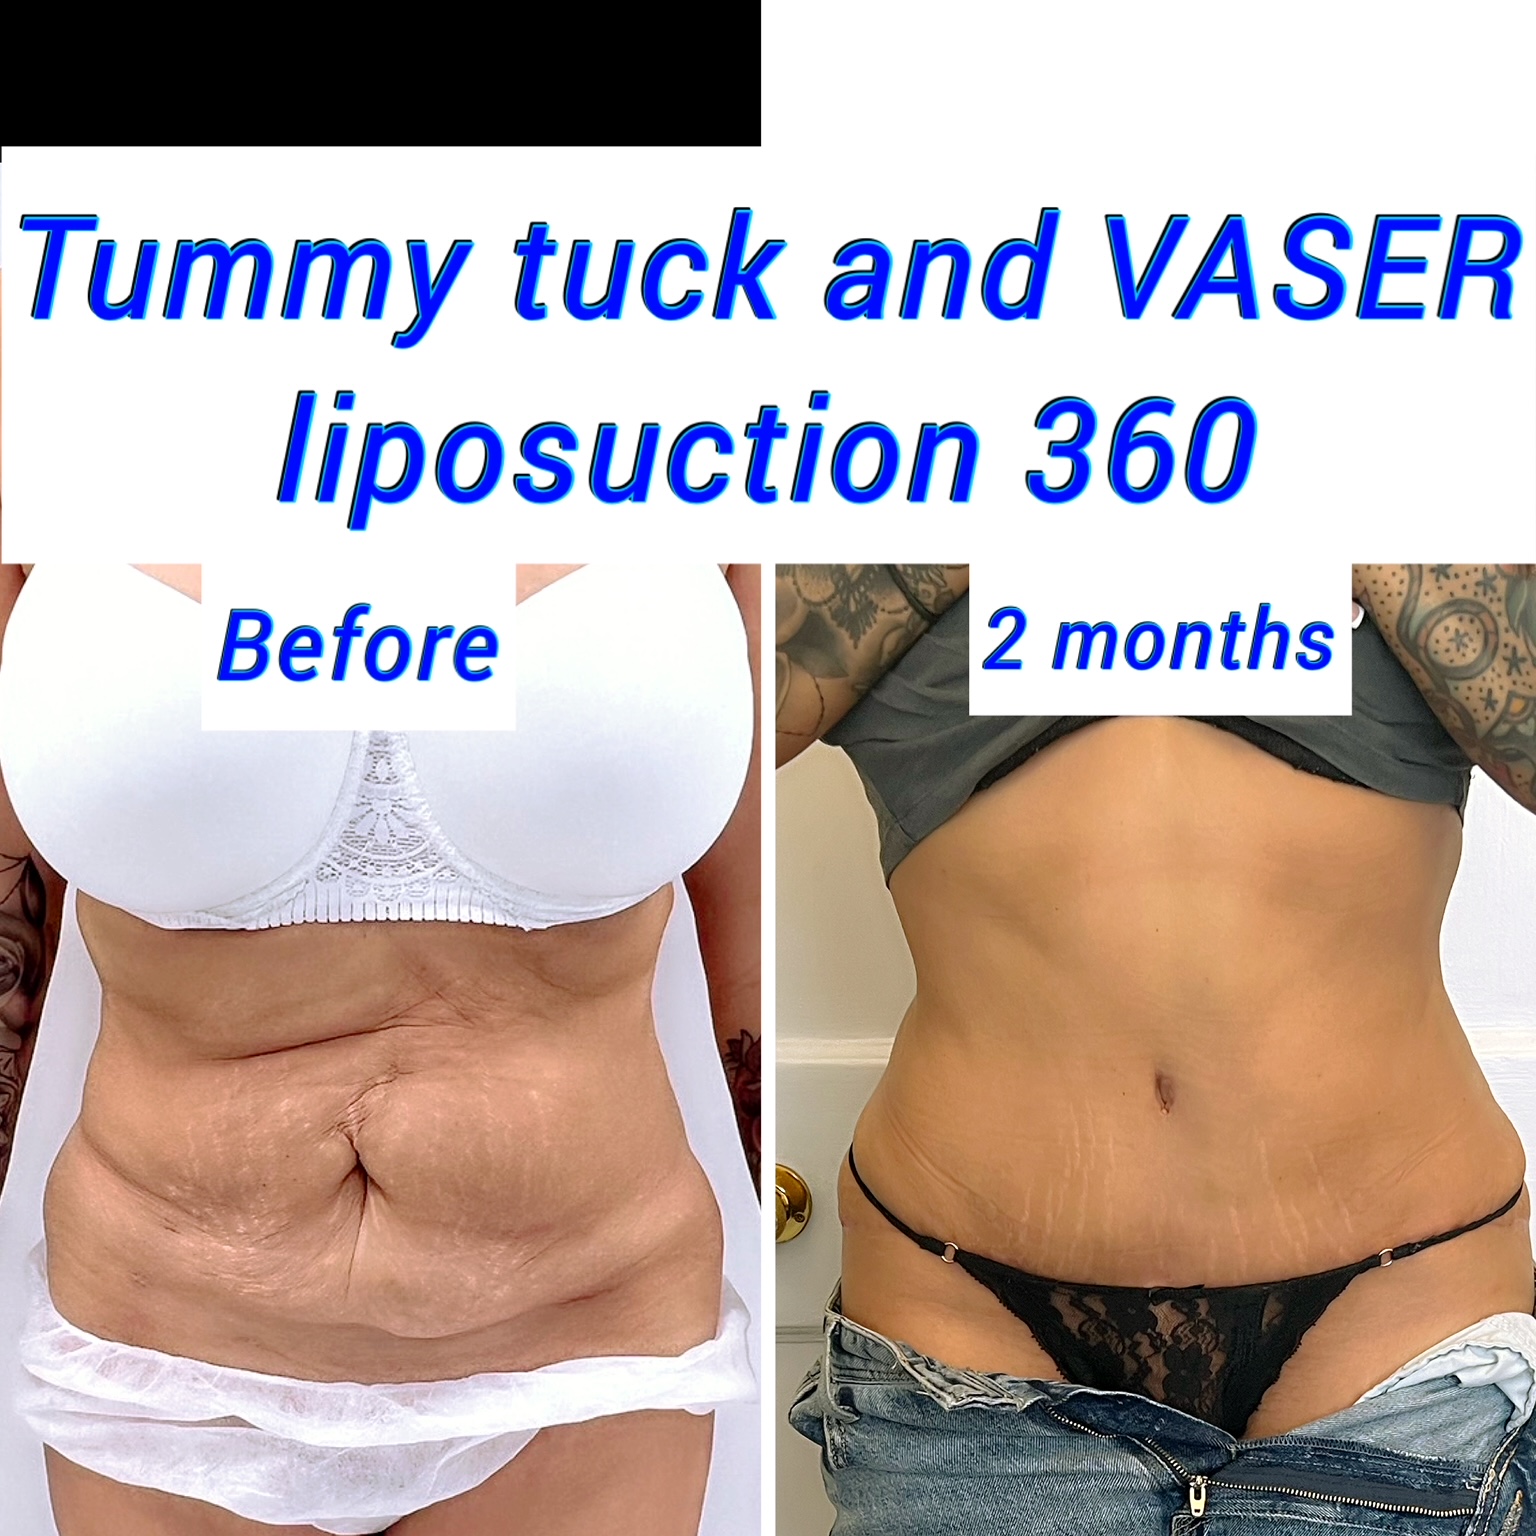 Tummy tuck before and after photos Harley Clinic London, UK